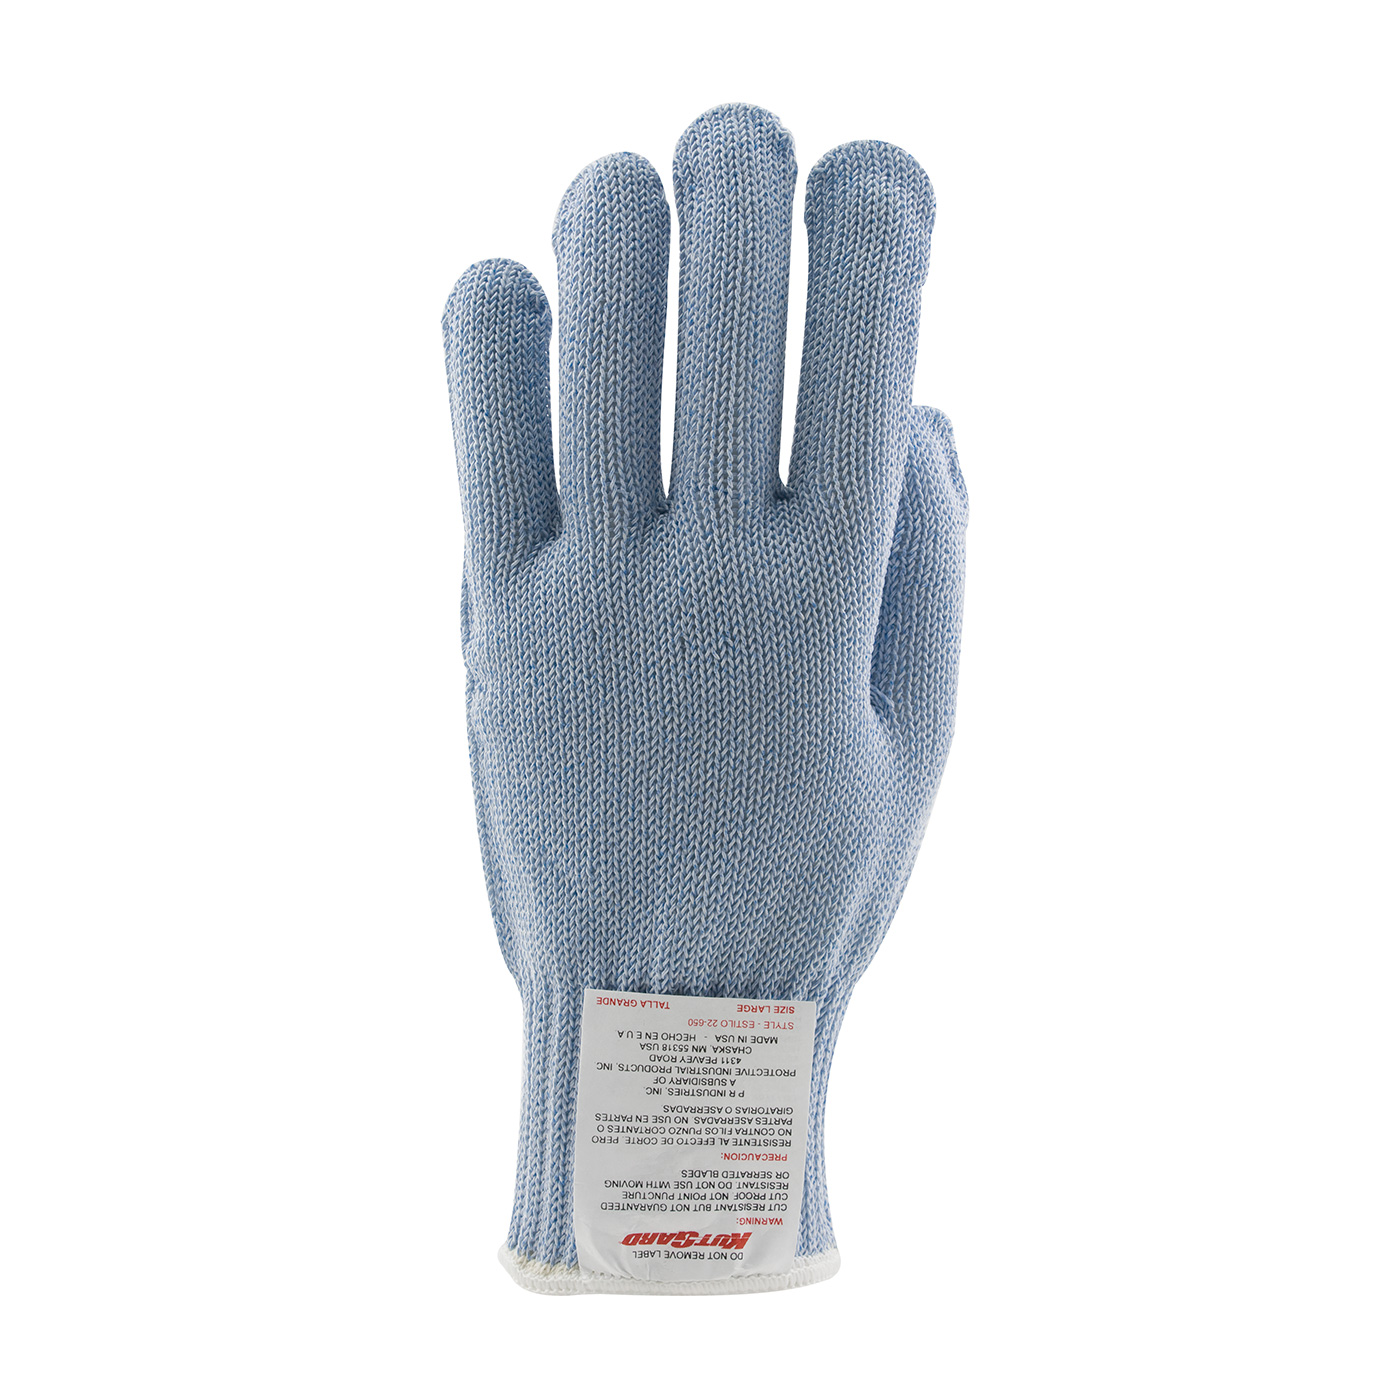 22-600 PIP® Claw Cover® Seamless Knit Blue PolyKor® Blended Glove - Heavy Weight